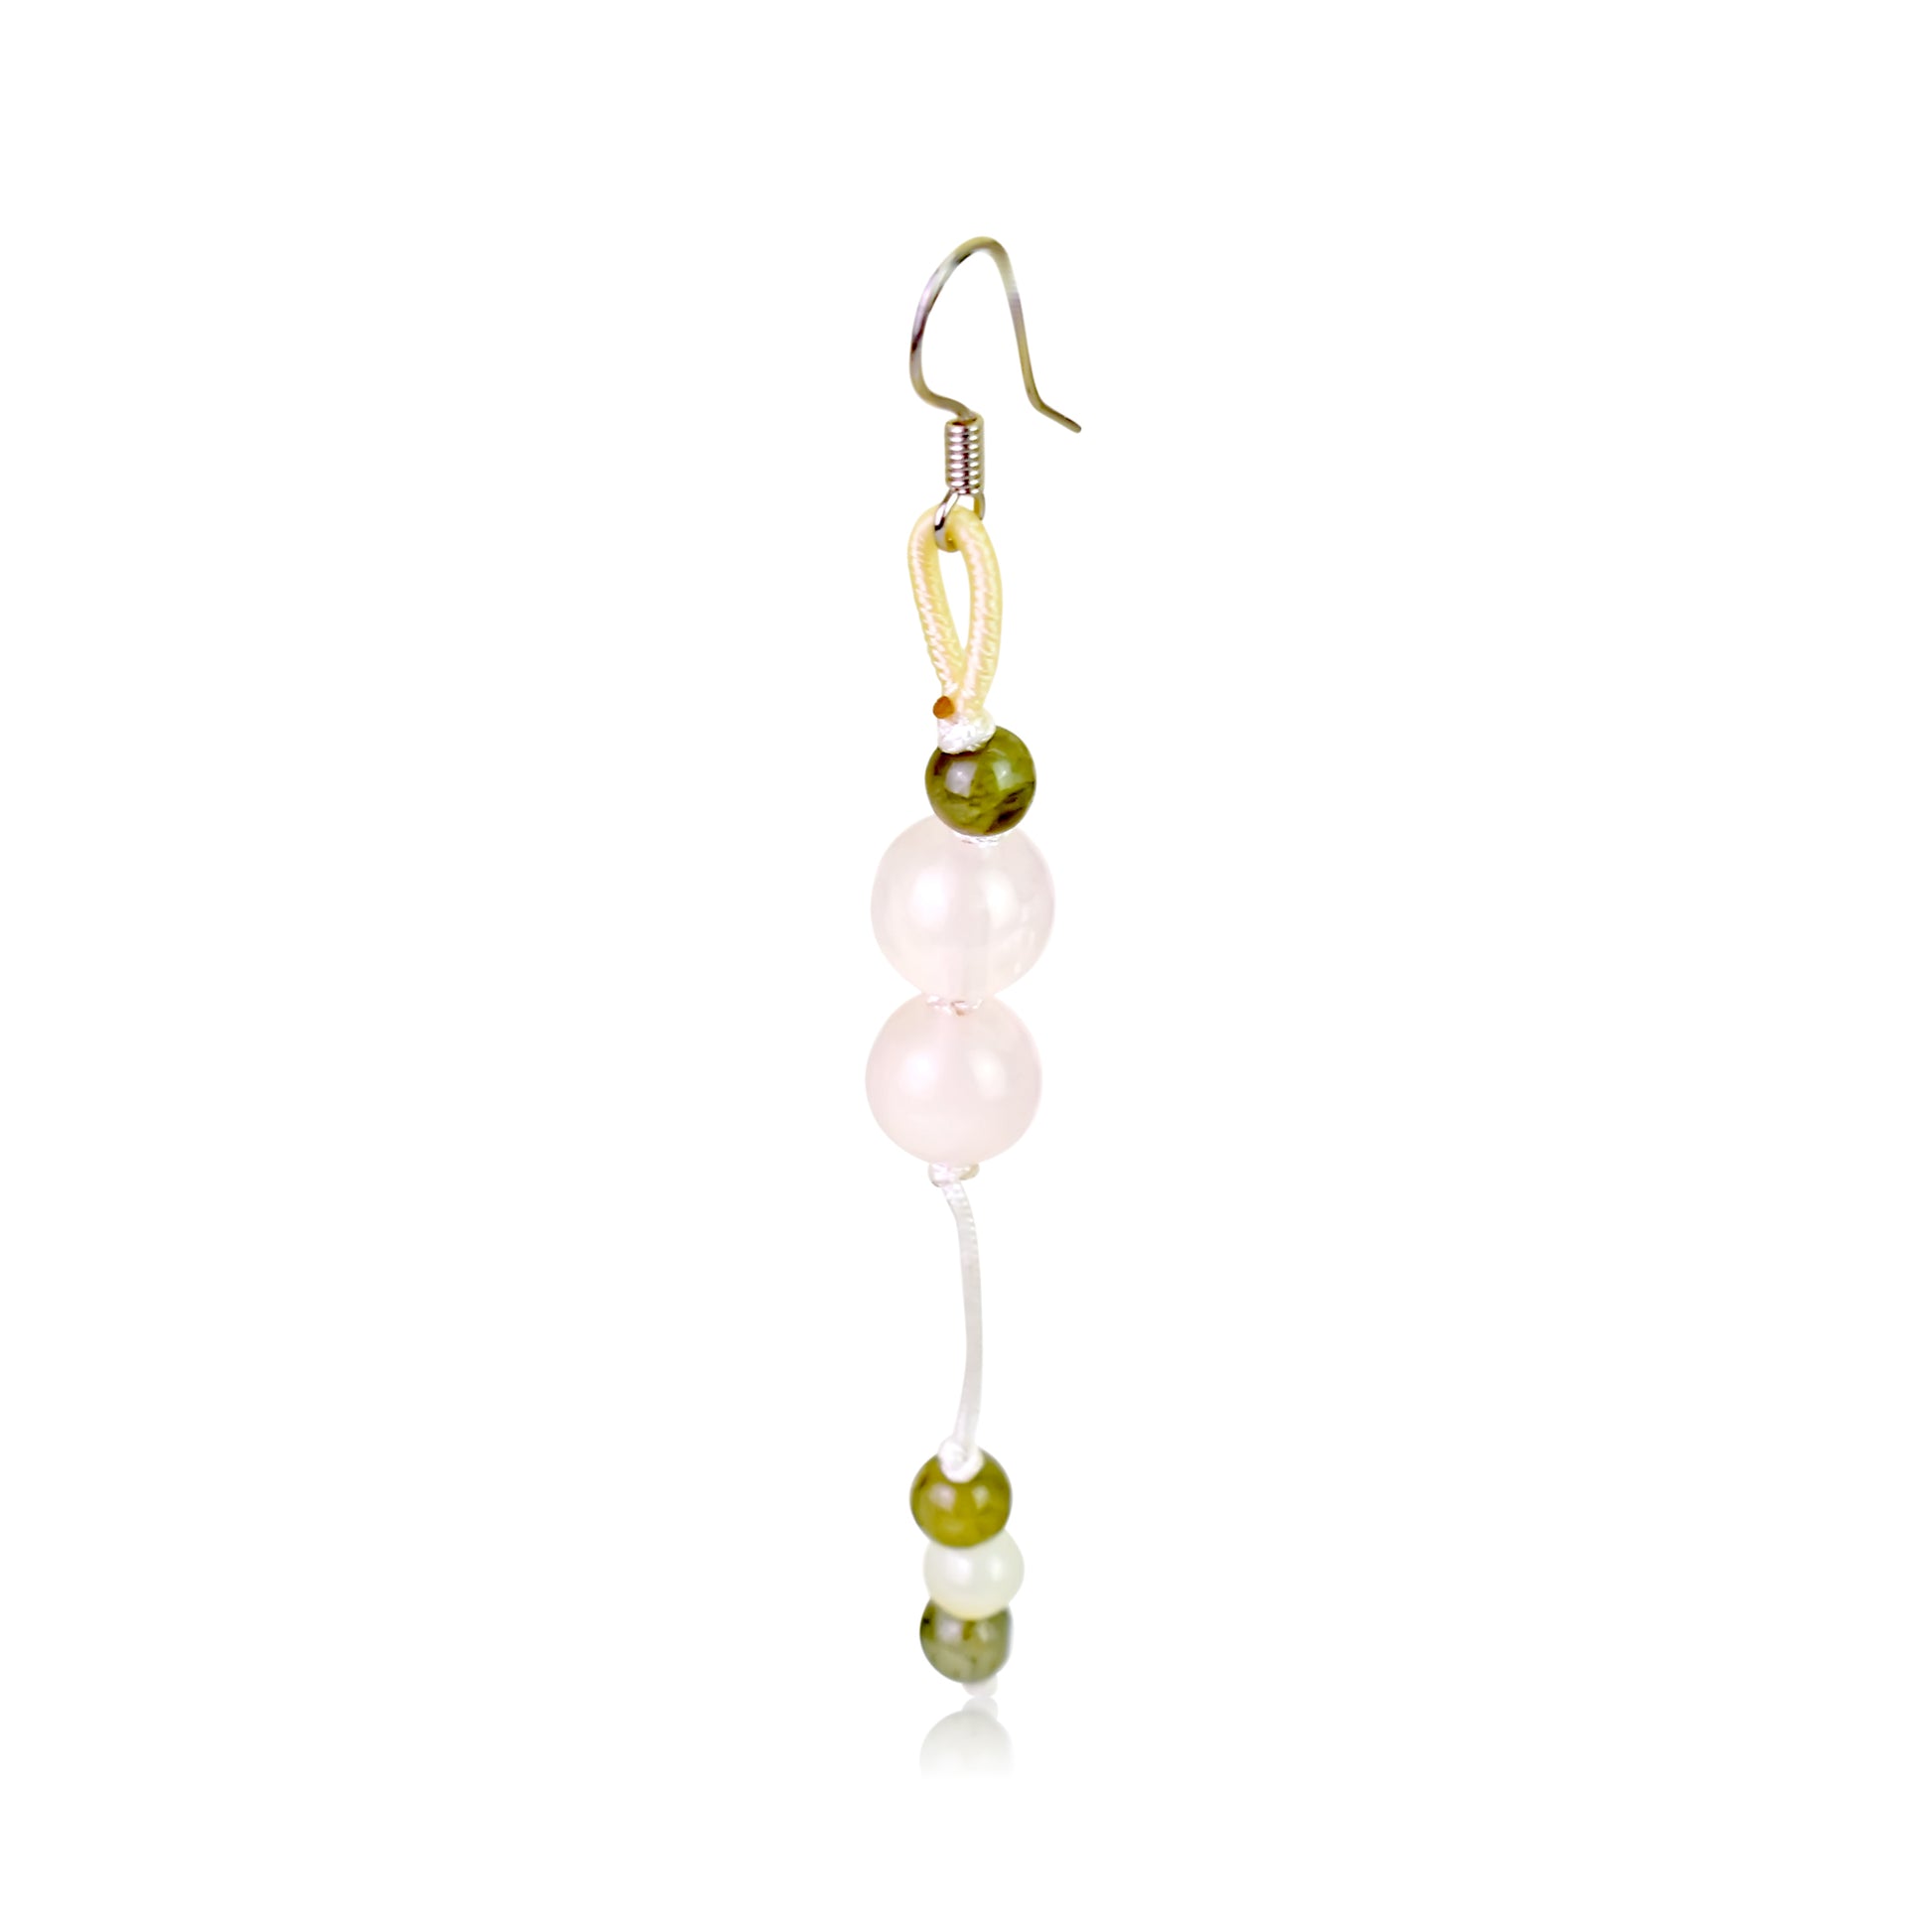 Add a Touch of Elegance with Artistic Beads Rose Quartz Earrings made with White Cord